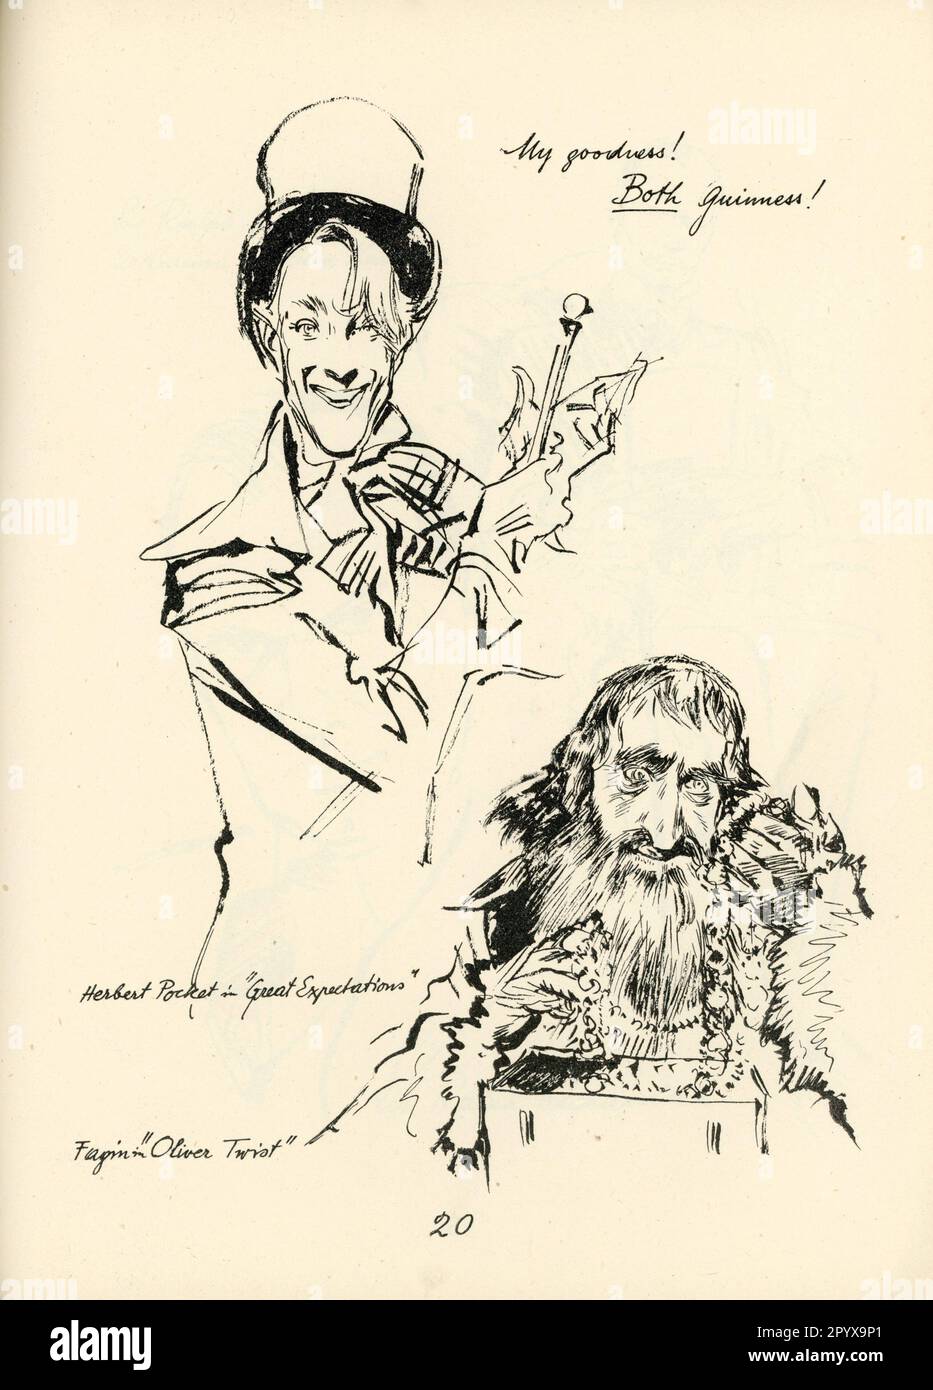 Caricature Portrait by EMIL WIESS of ALEC GUINNESS as Herbert Pocket in GREAT EXPECTATIONS and as Fagin in OLIVER TWIST published in 1948. Stock Photo